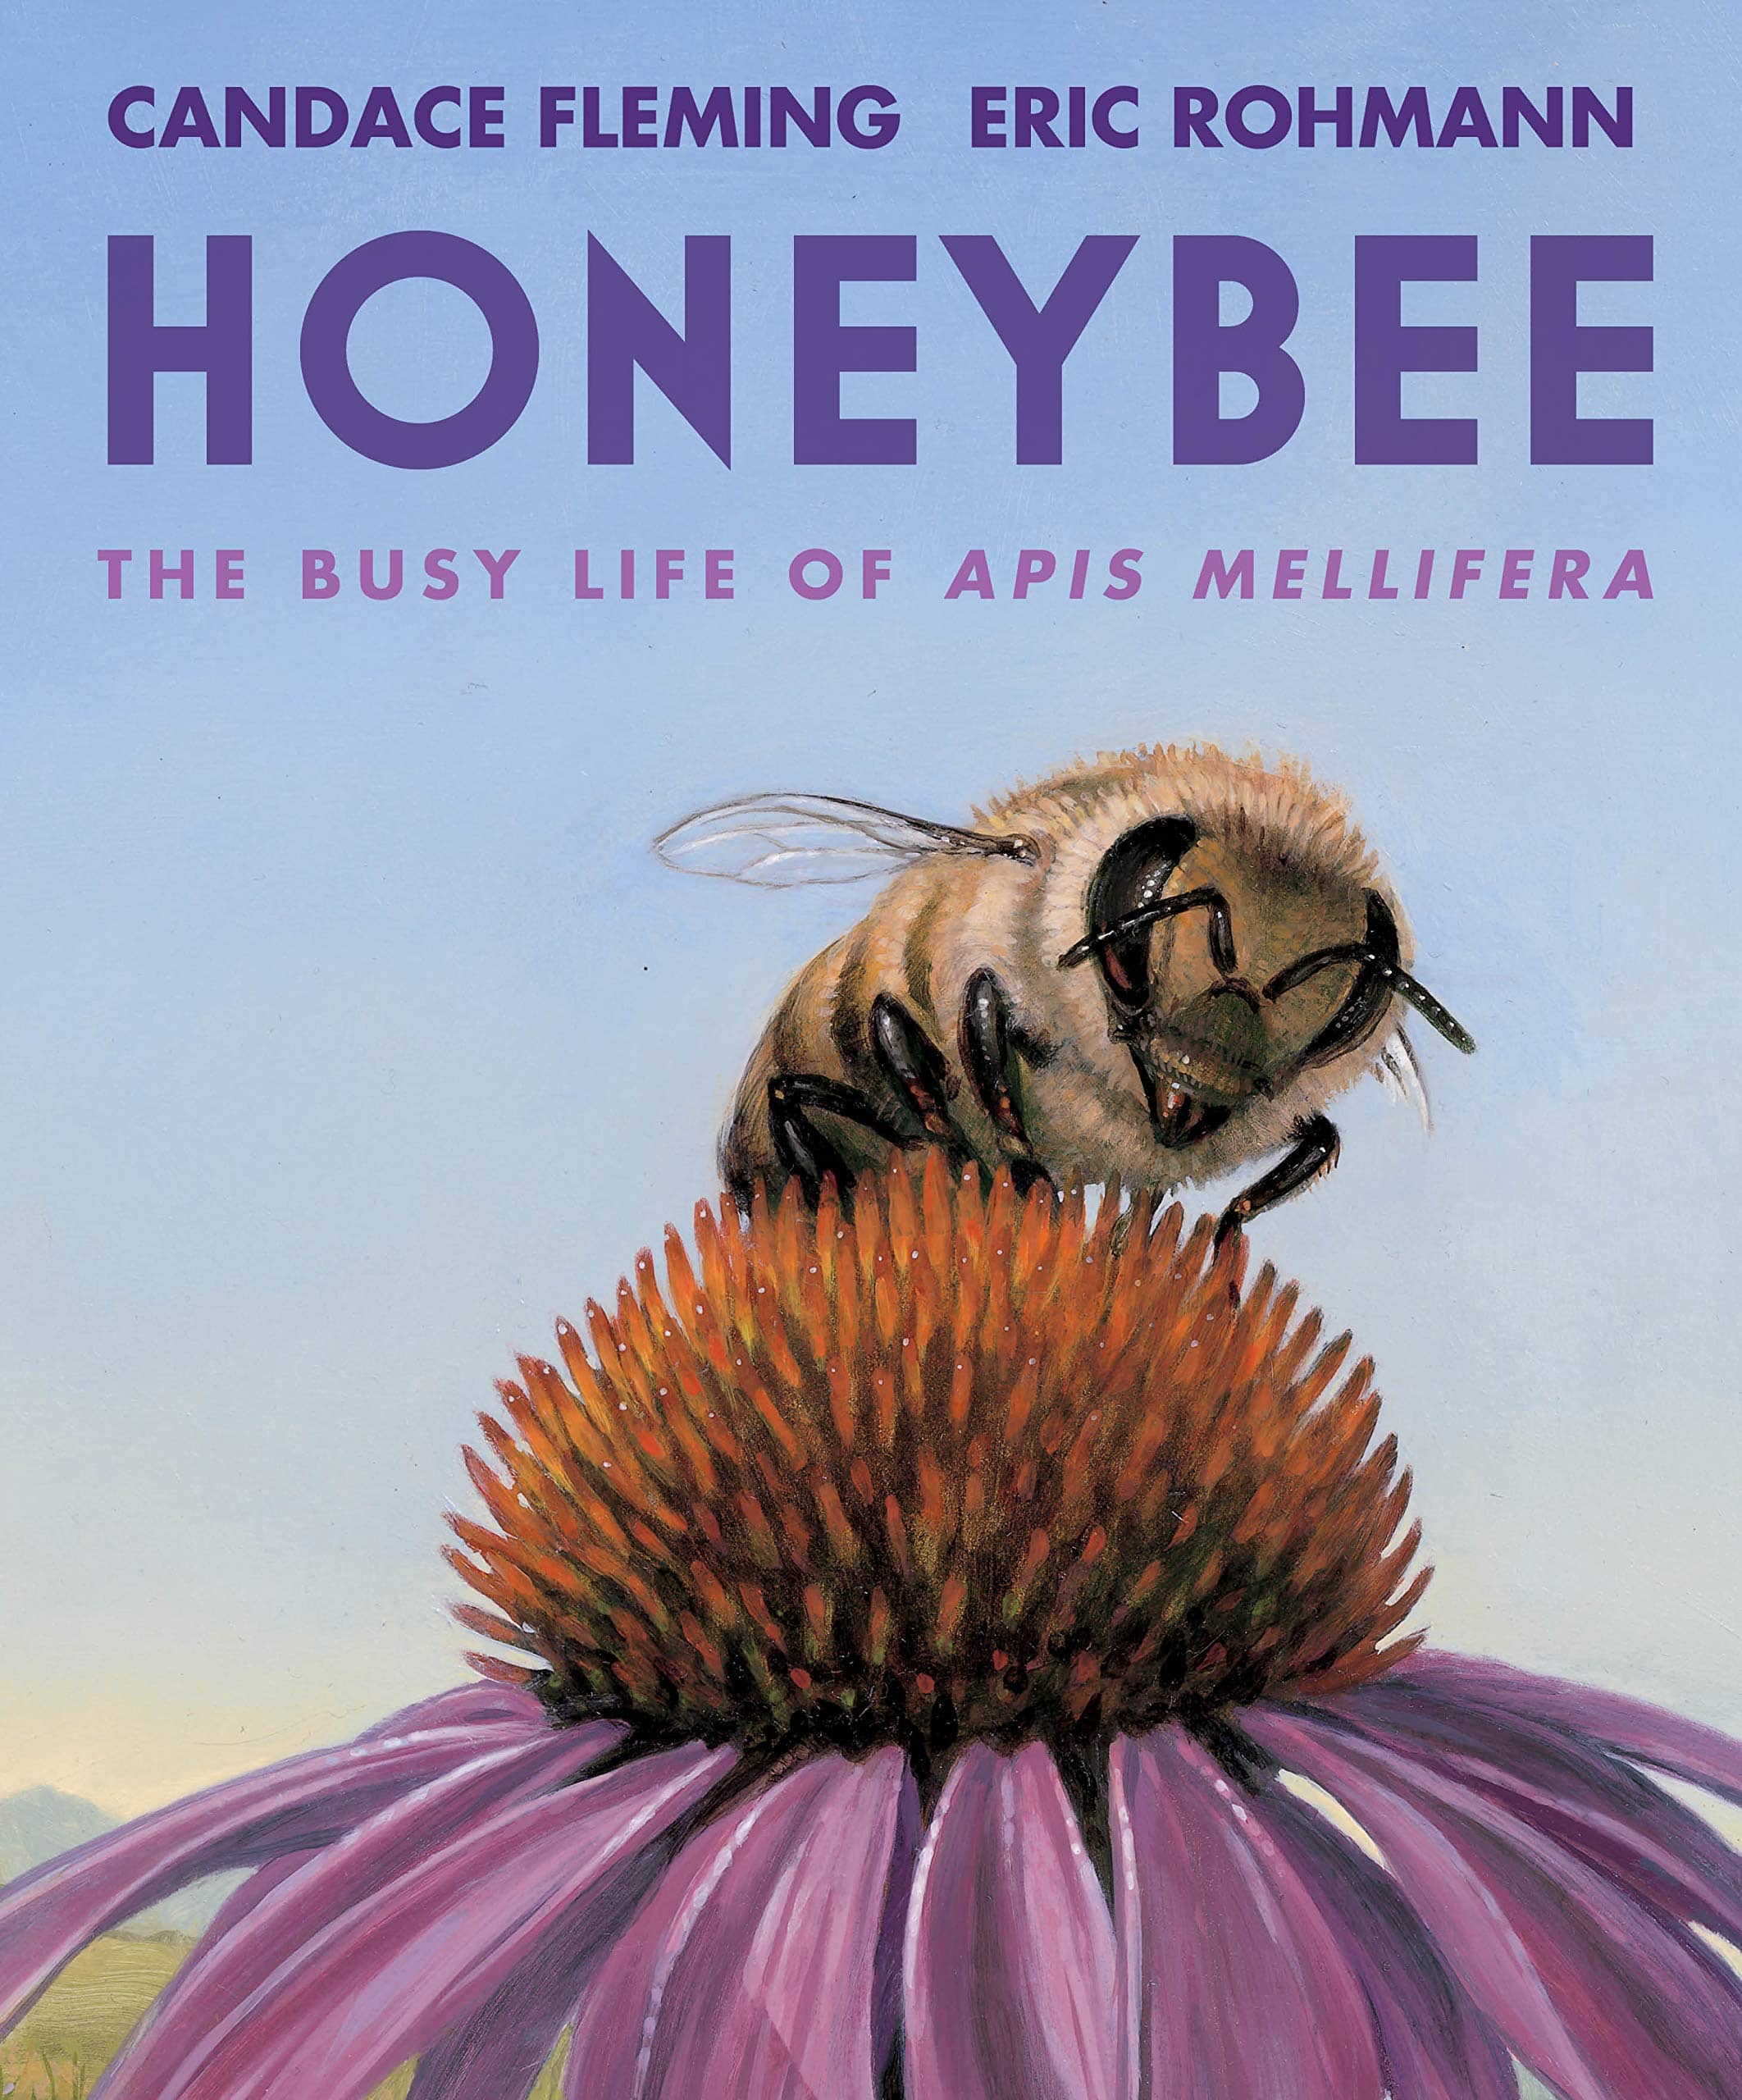 Honeybee: The Busy Life of Apis Mellifera book cover